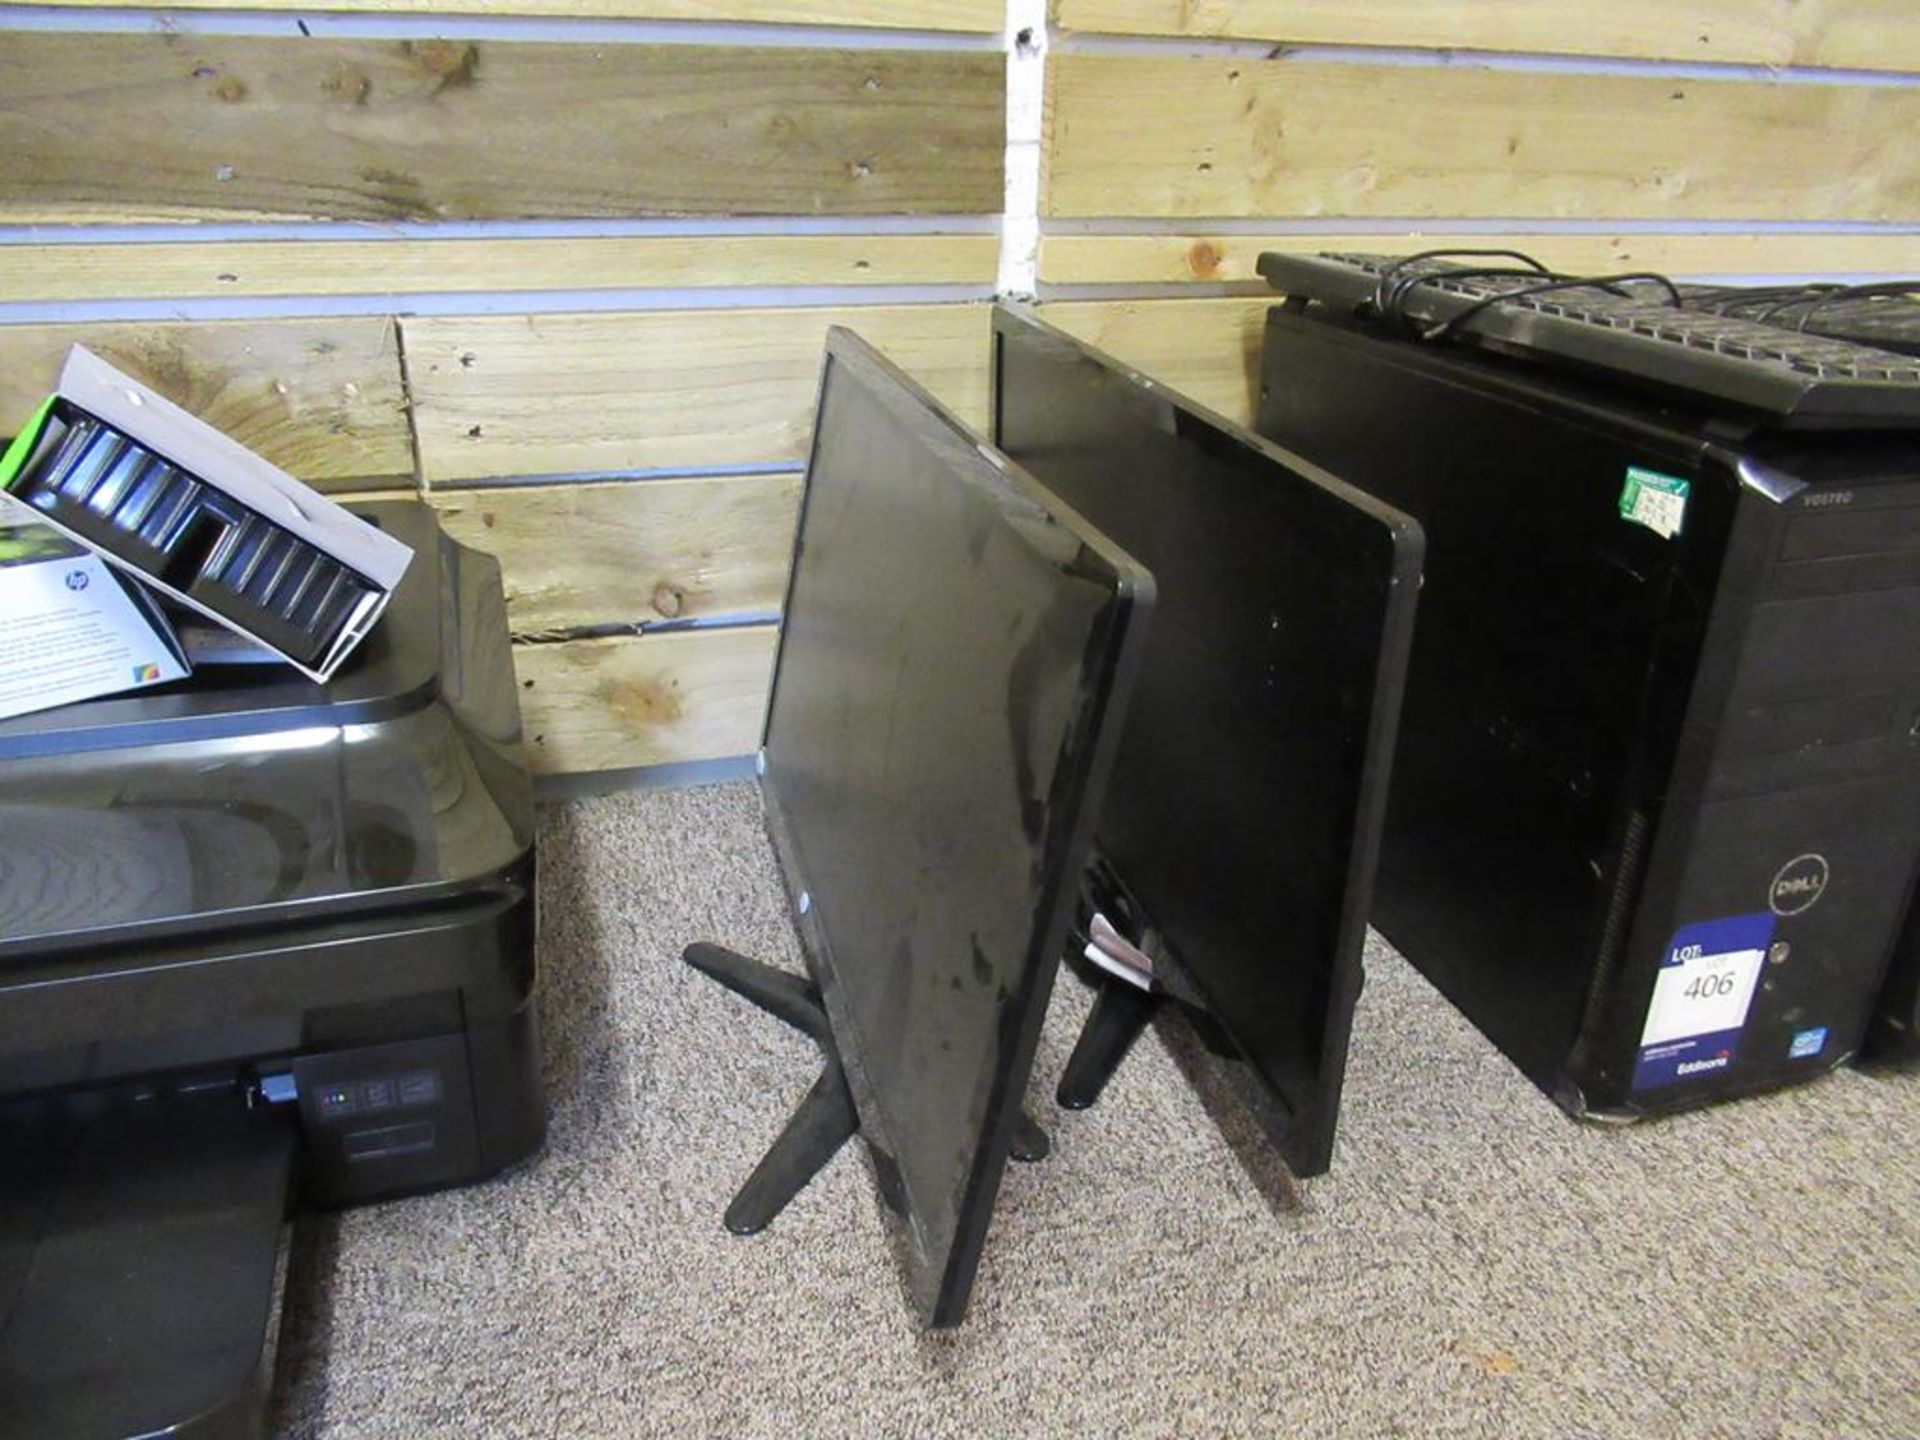 PC's and Monitors, along with Printers. - Image 3 of 4